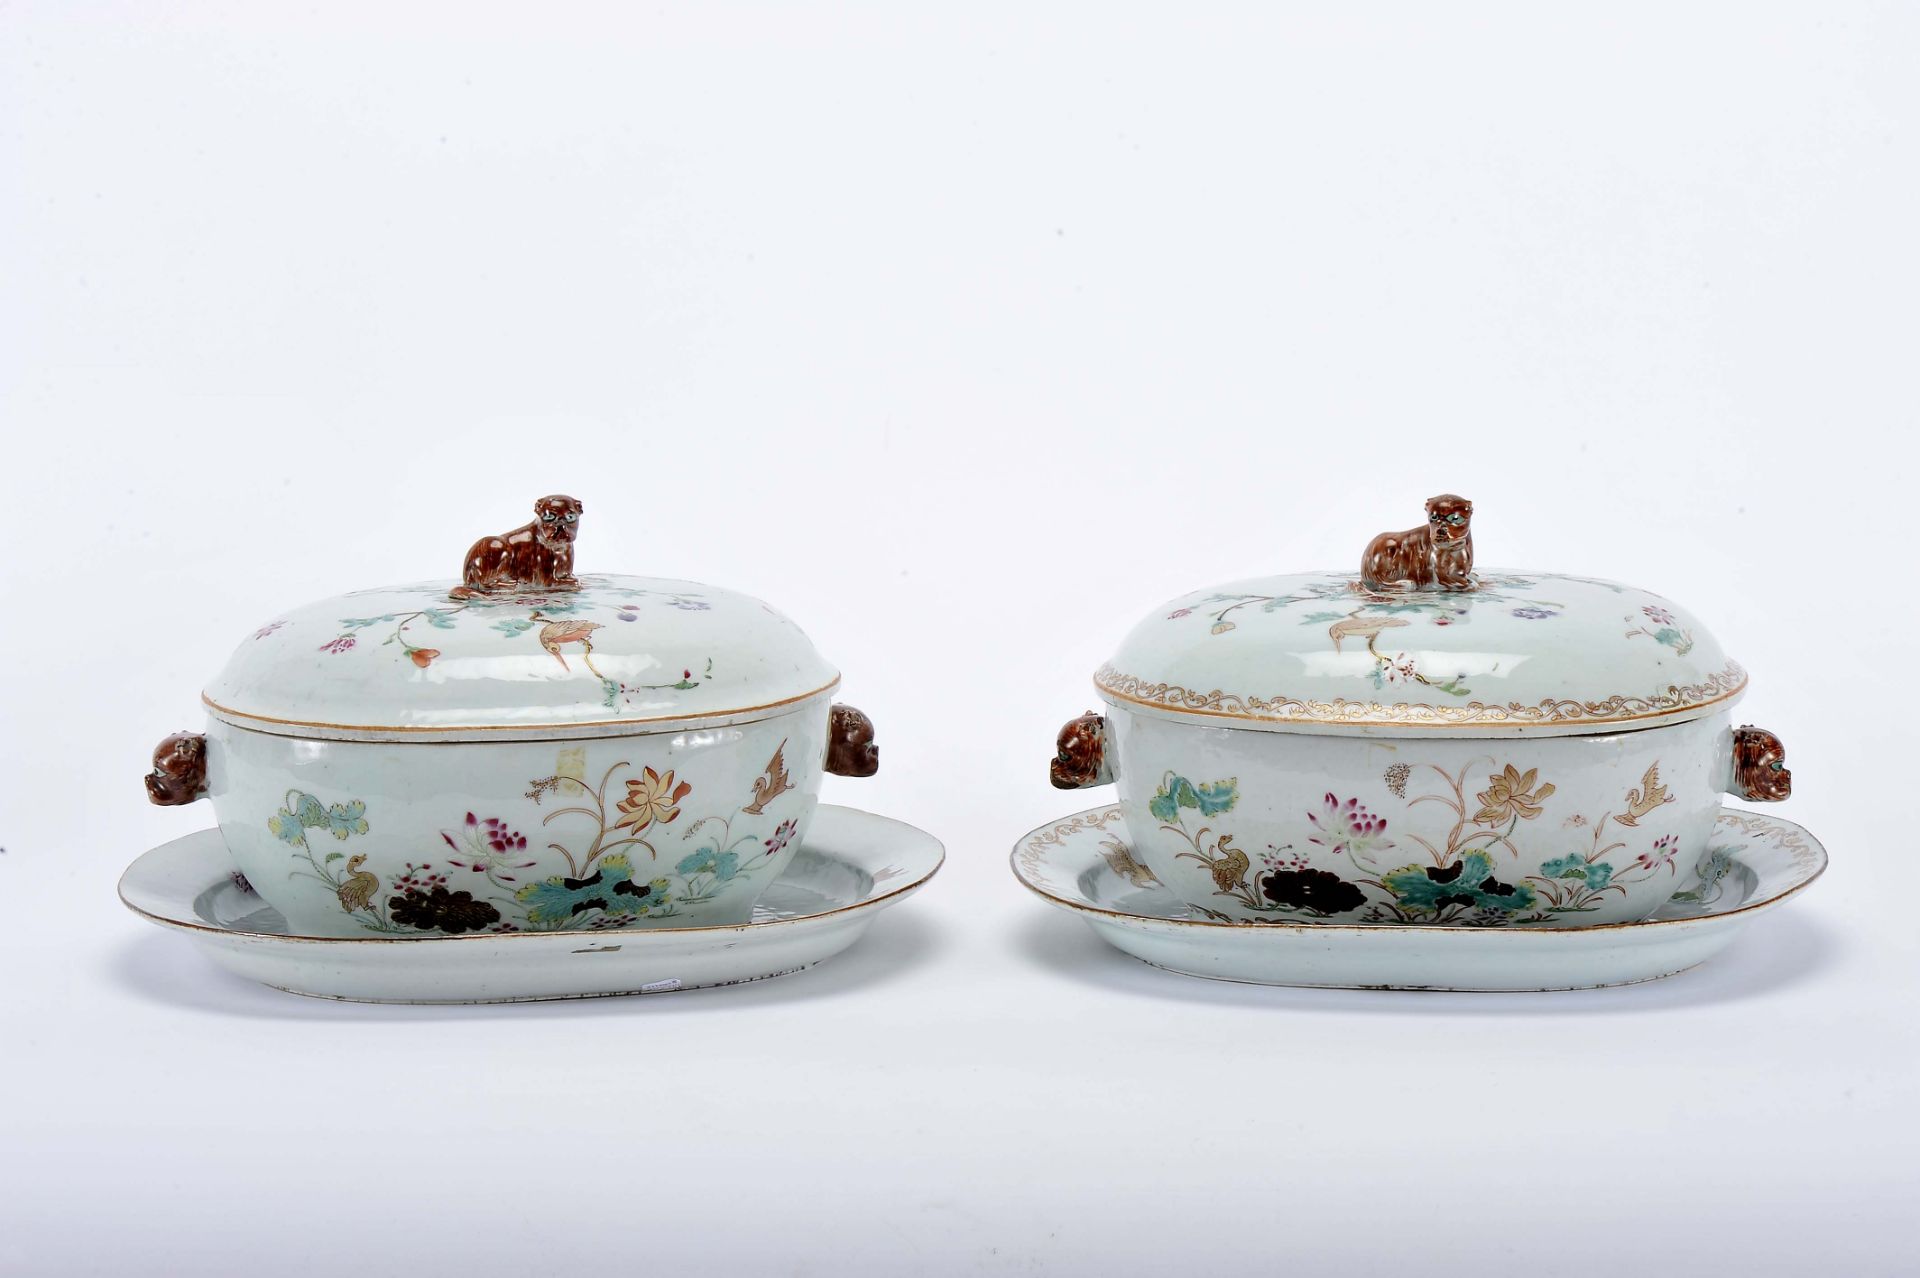 Two tureens with stands